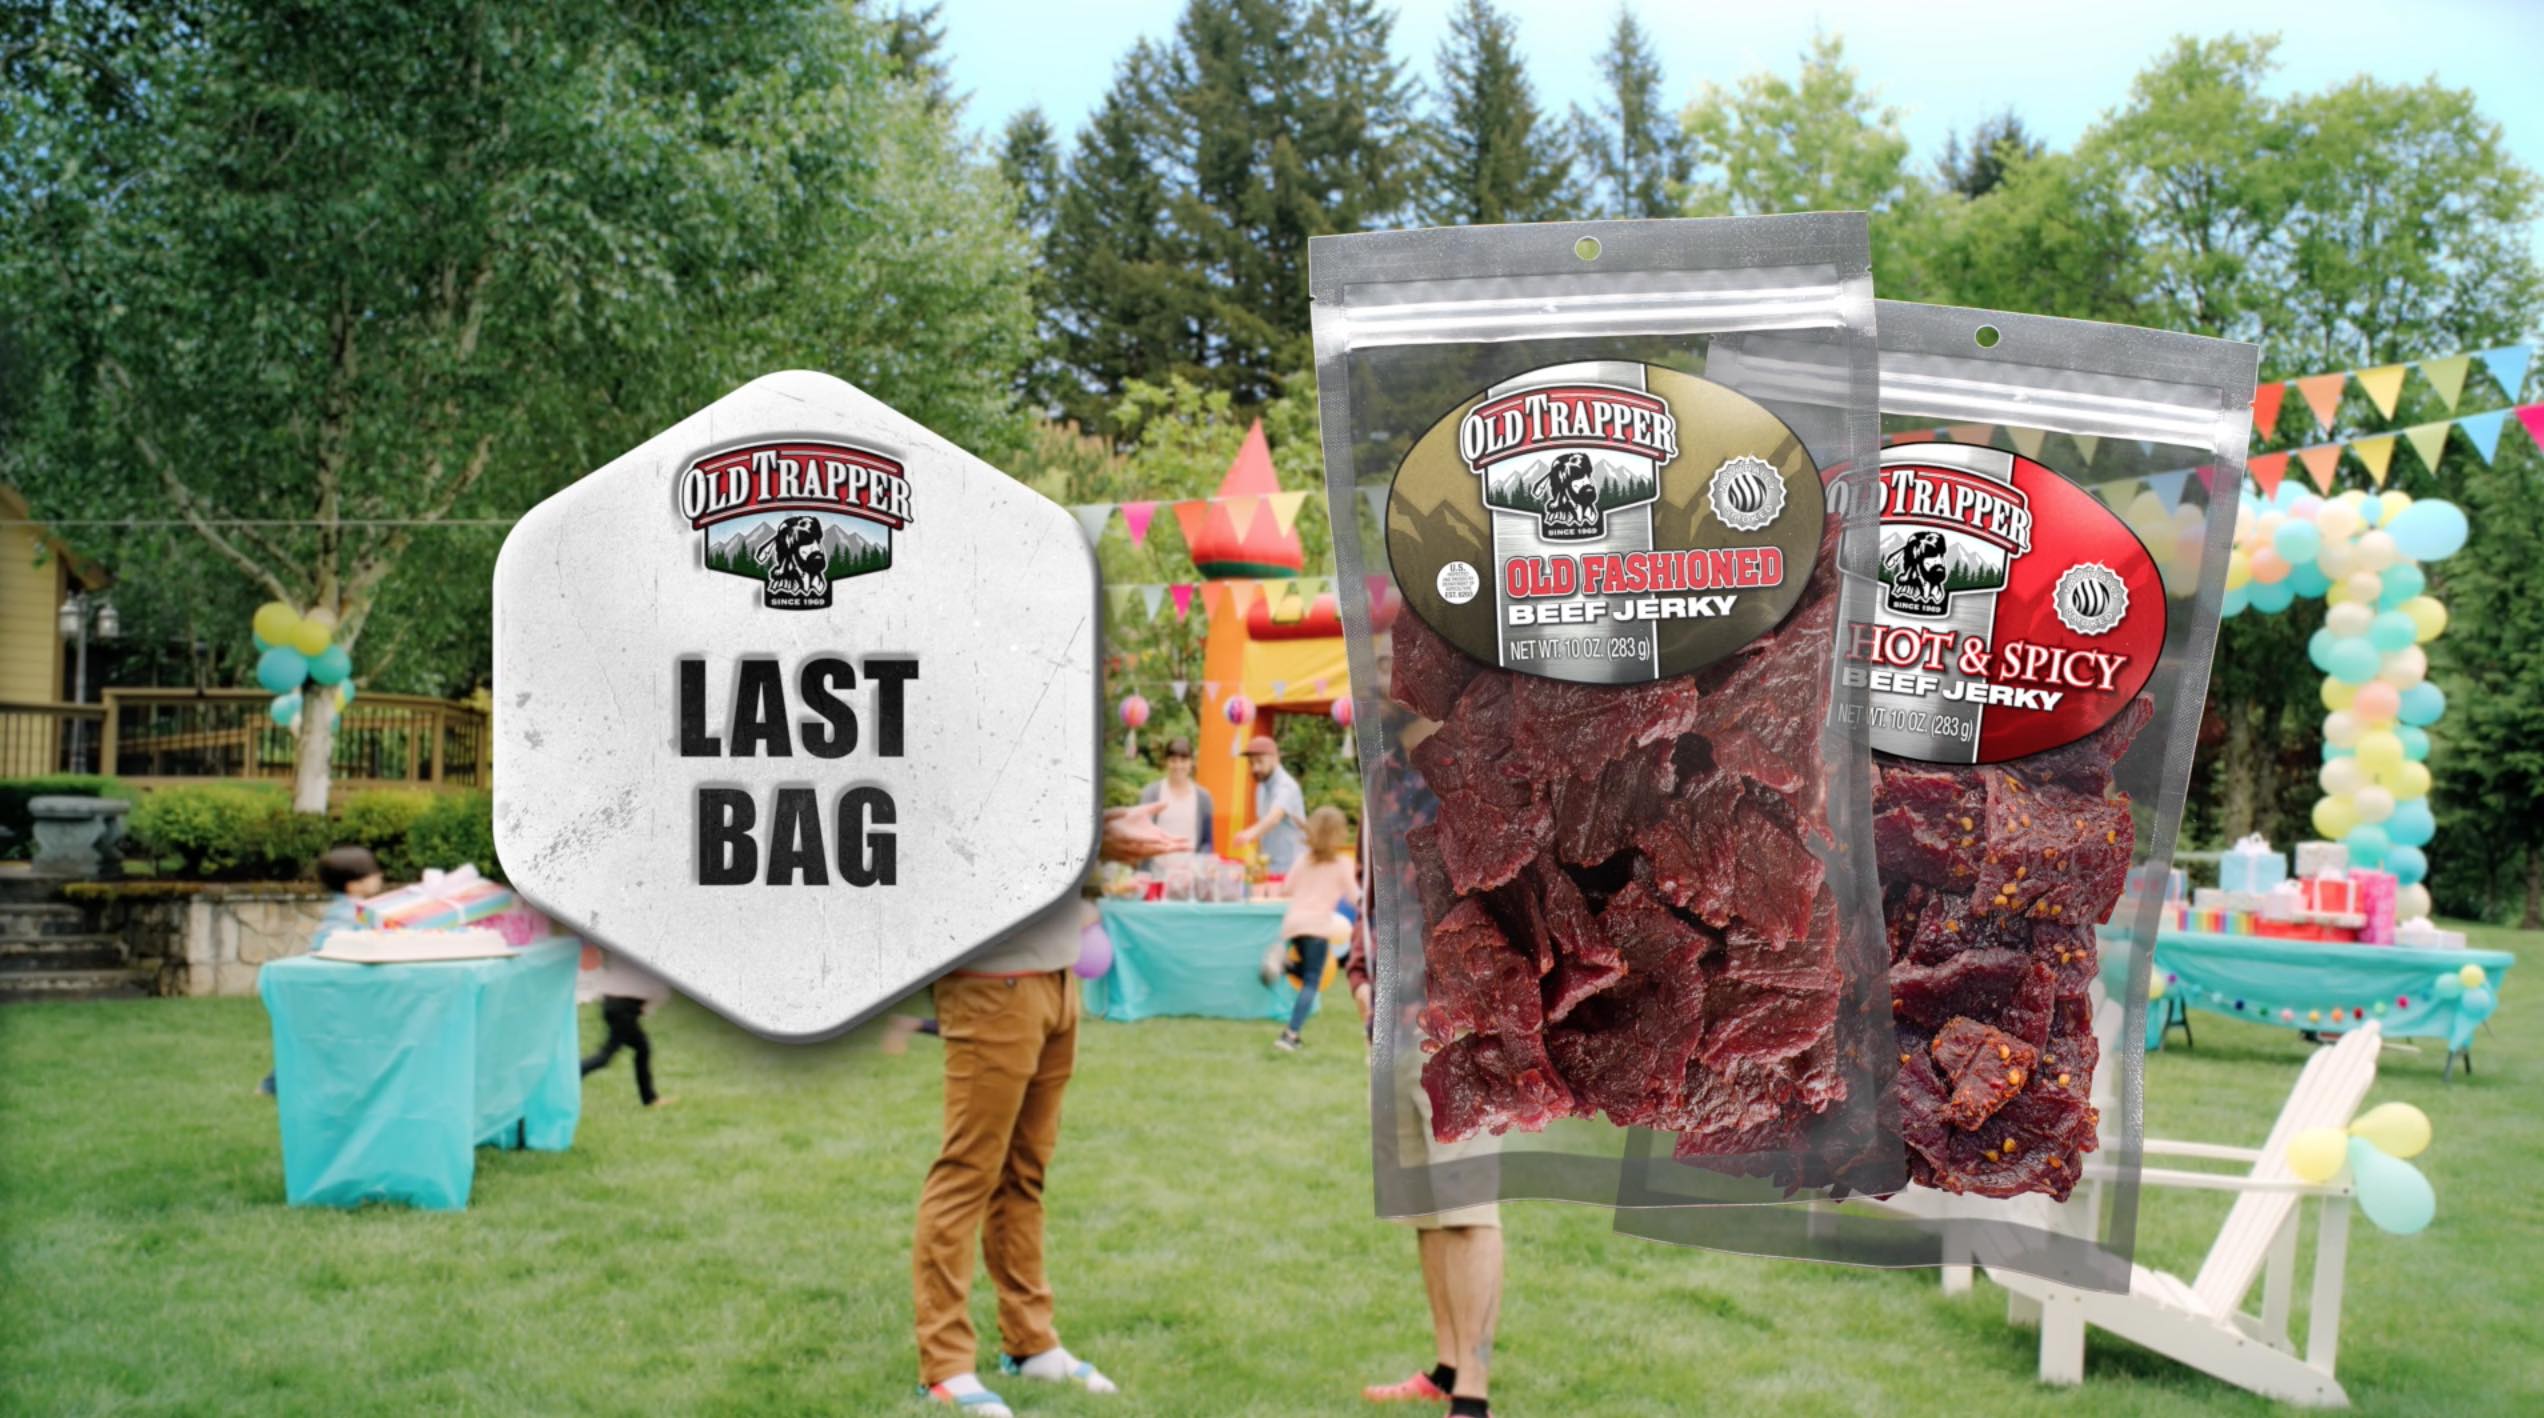 #TrapperBeefs: Last Bag (Extended Edition)